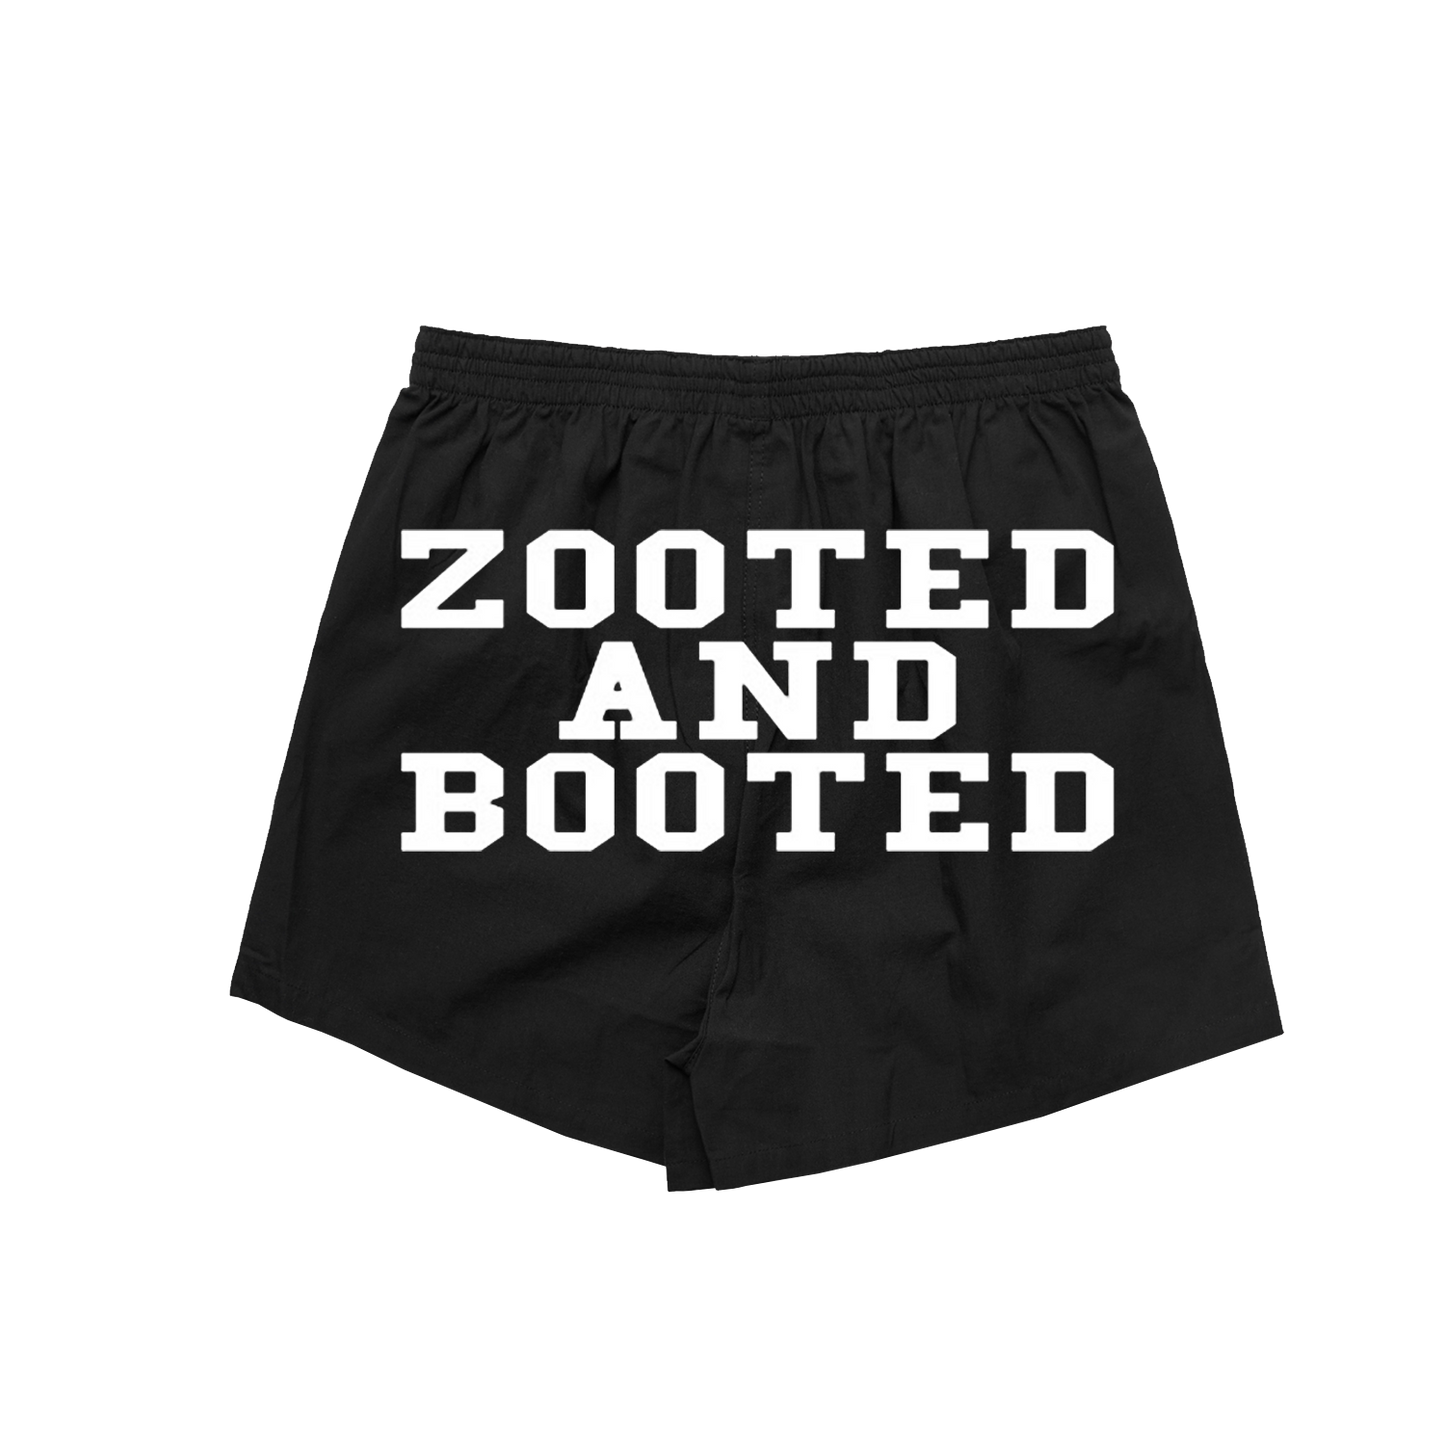 zooted and booted boxers